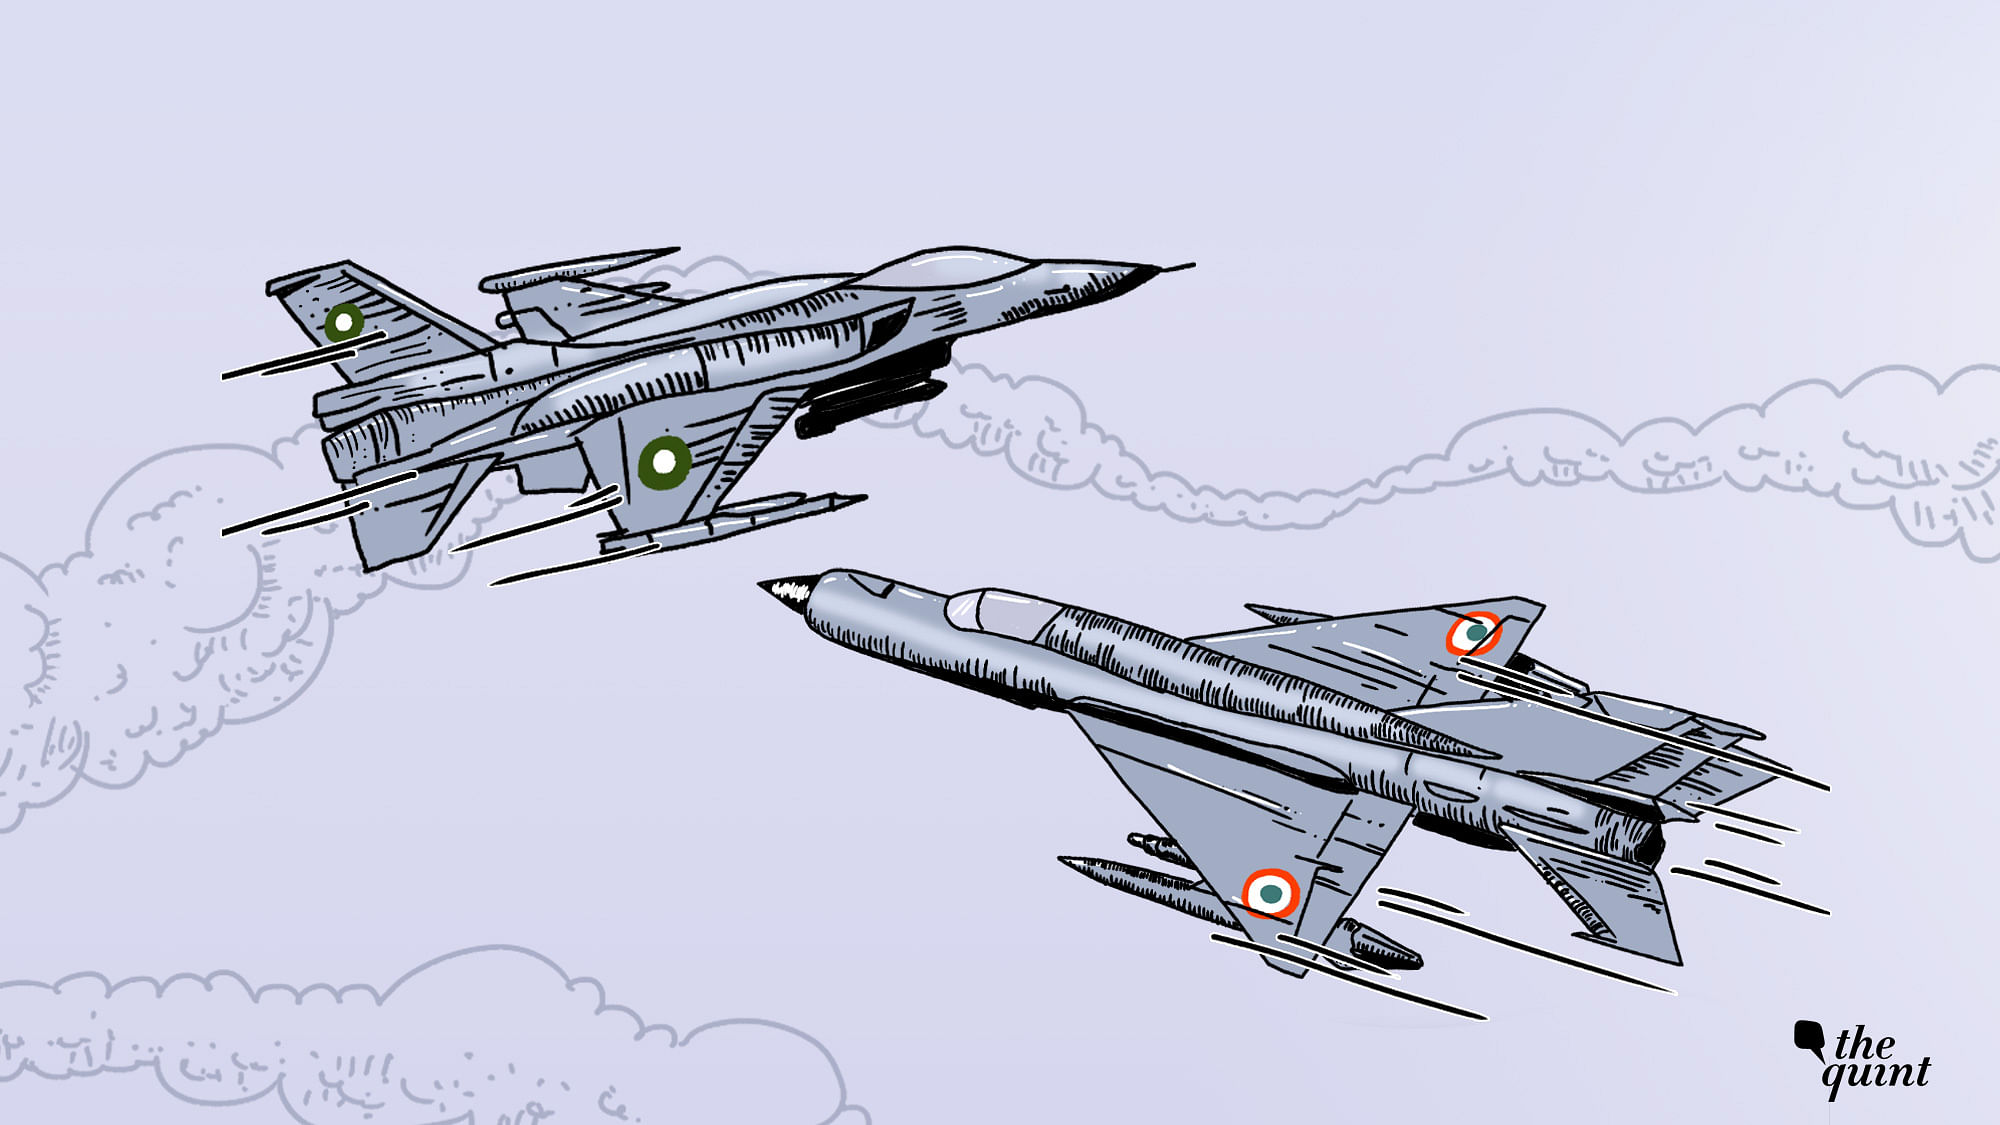 Fighter Jet Coloring Pages - Free & Printable!